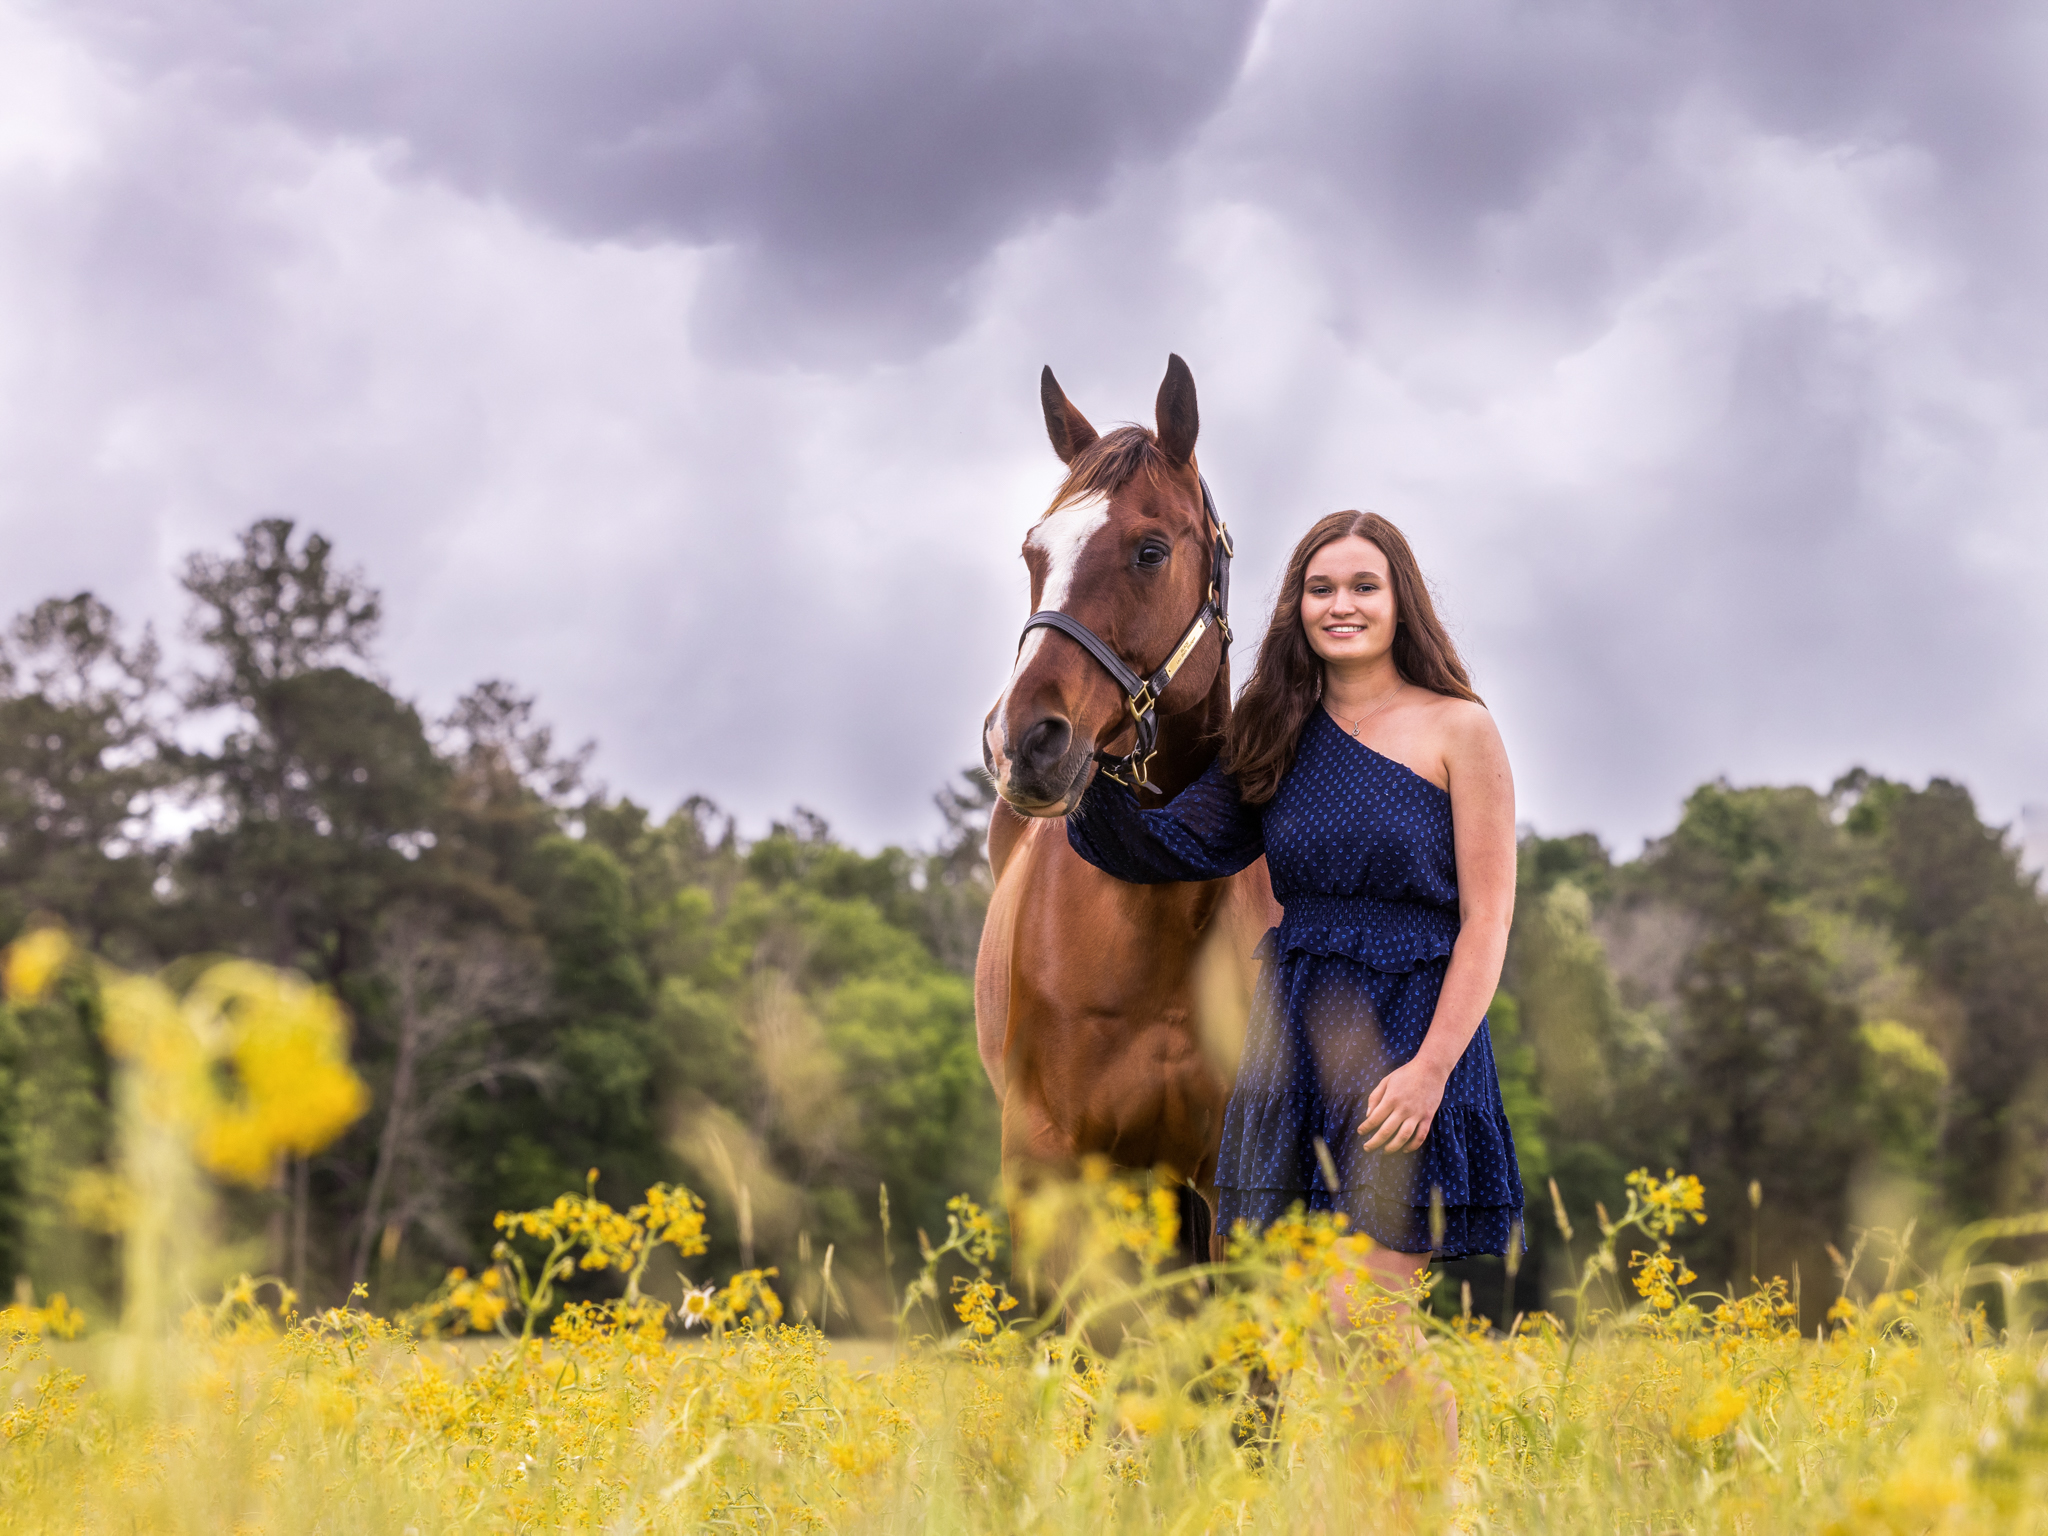 High School senior pictures with horse at Chickamauga Battlefield